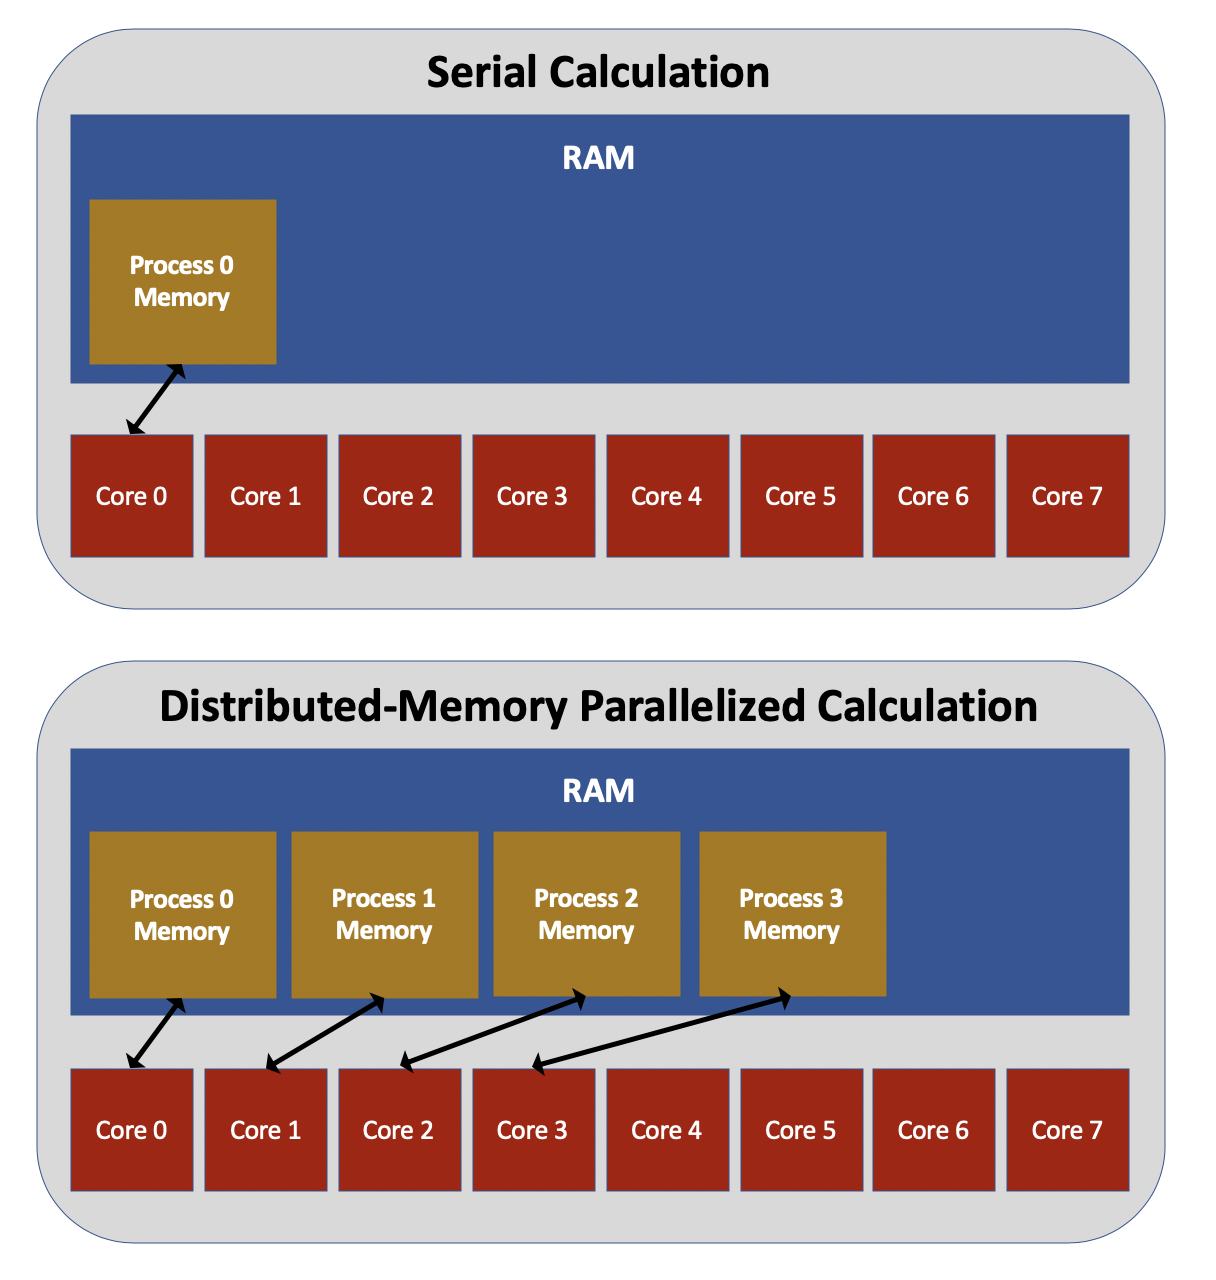 A diagram of a distributed computing system showing how processes are distributed acorss multiple cores for paralell computation.